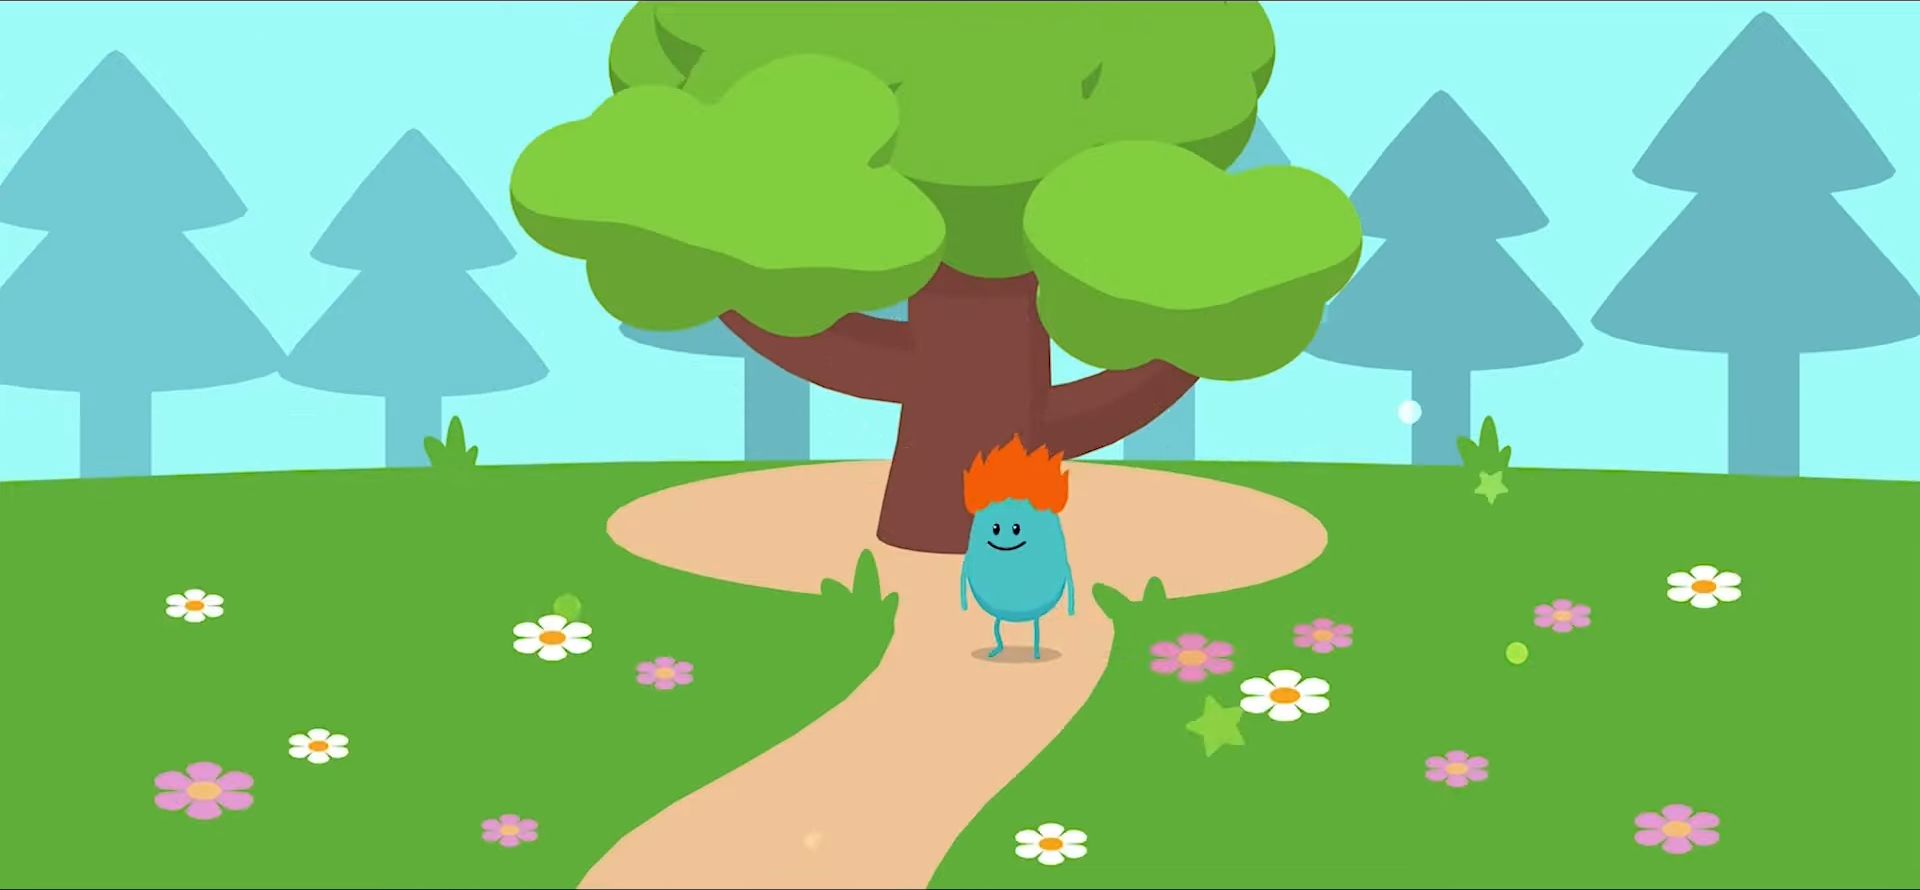 Gameplay of the Dumb Ways to Die 4 for Android phone or tablet.